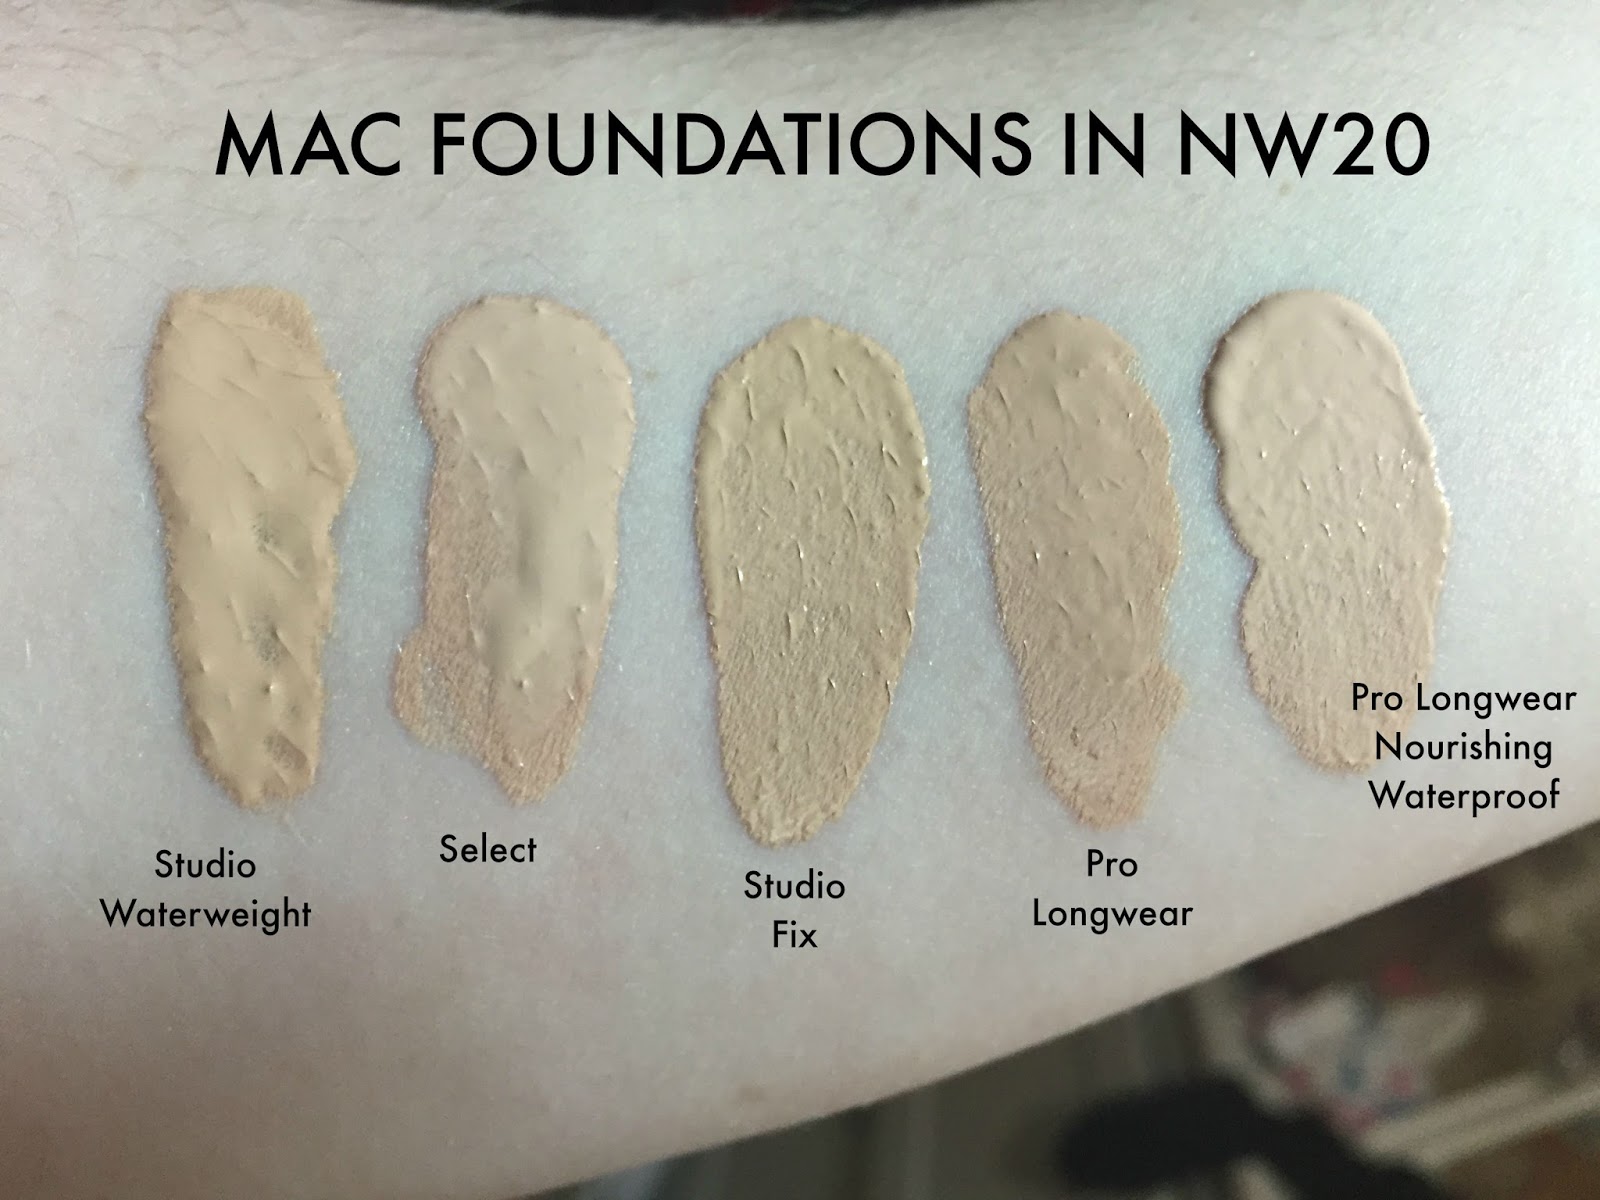 A one-step powder and foundation that provides a matte texture with medium to full coverage.